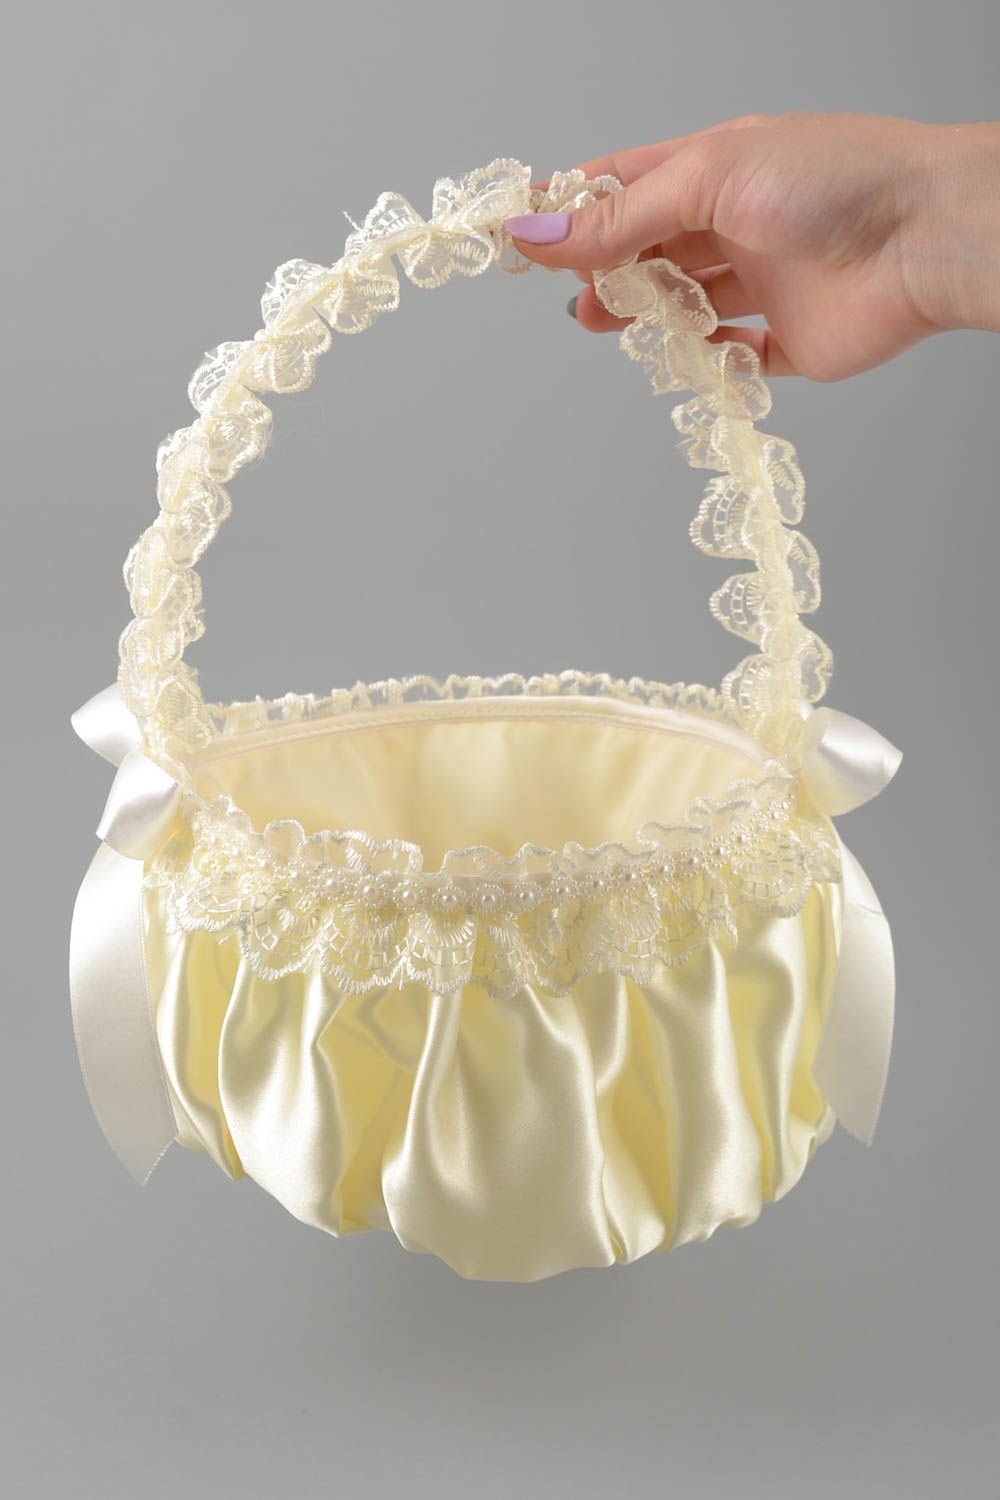 Handmade wedding basket for money made of satin and guipure of champagne color photo 5